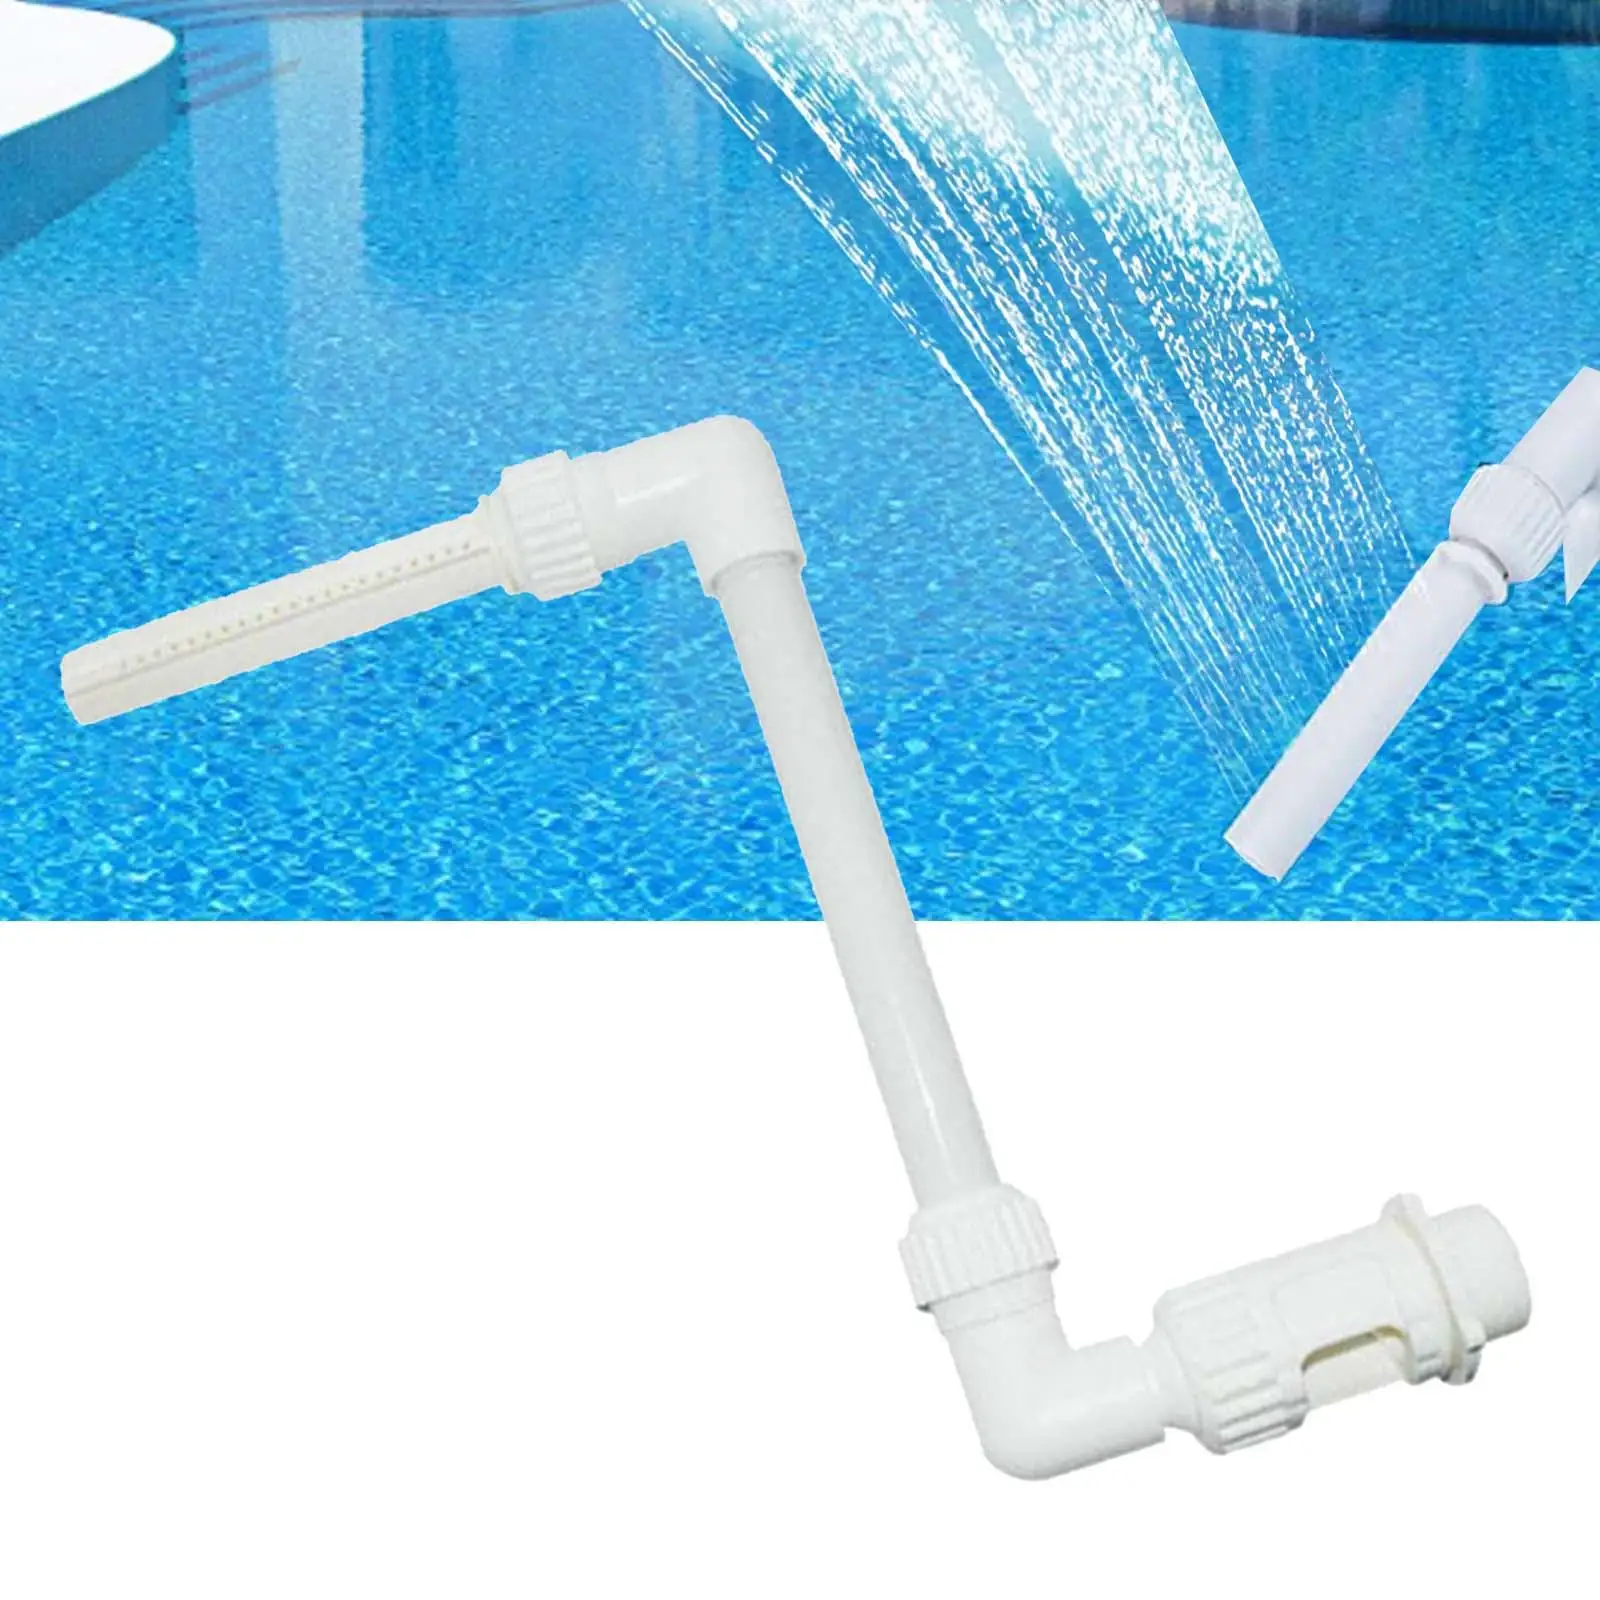 Cooling Aerator SPA Swimming Pool Waterfall Spray Adjustable Pool Aerator for in Ground Swimming Backyard above Ground Decor